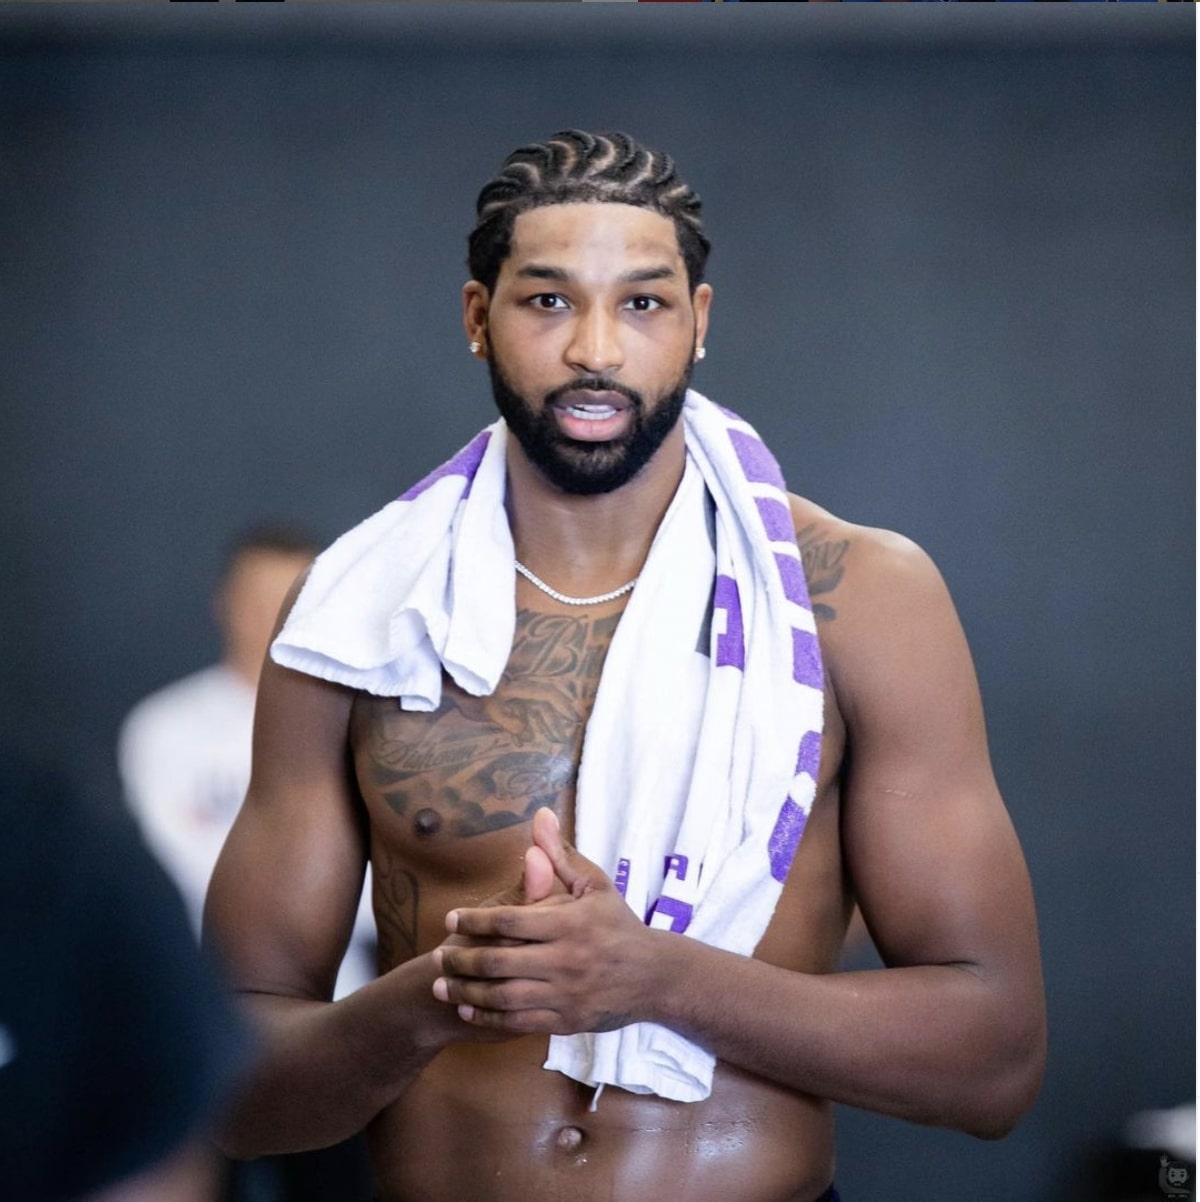 NBA選手のトリスタン・トンプソン（画像は『Tristan Thompson　2021年10月14日付Instagram「It’s hard to beat a person who never gives up.」』のスクリーンショット）